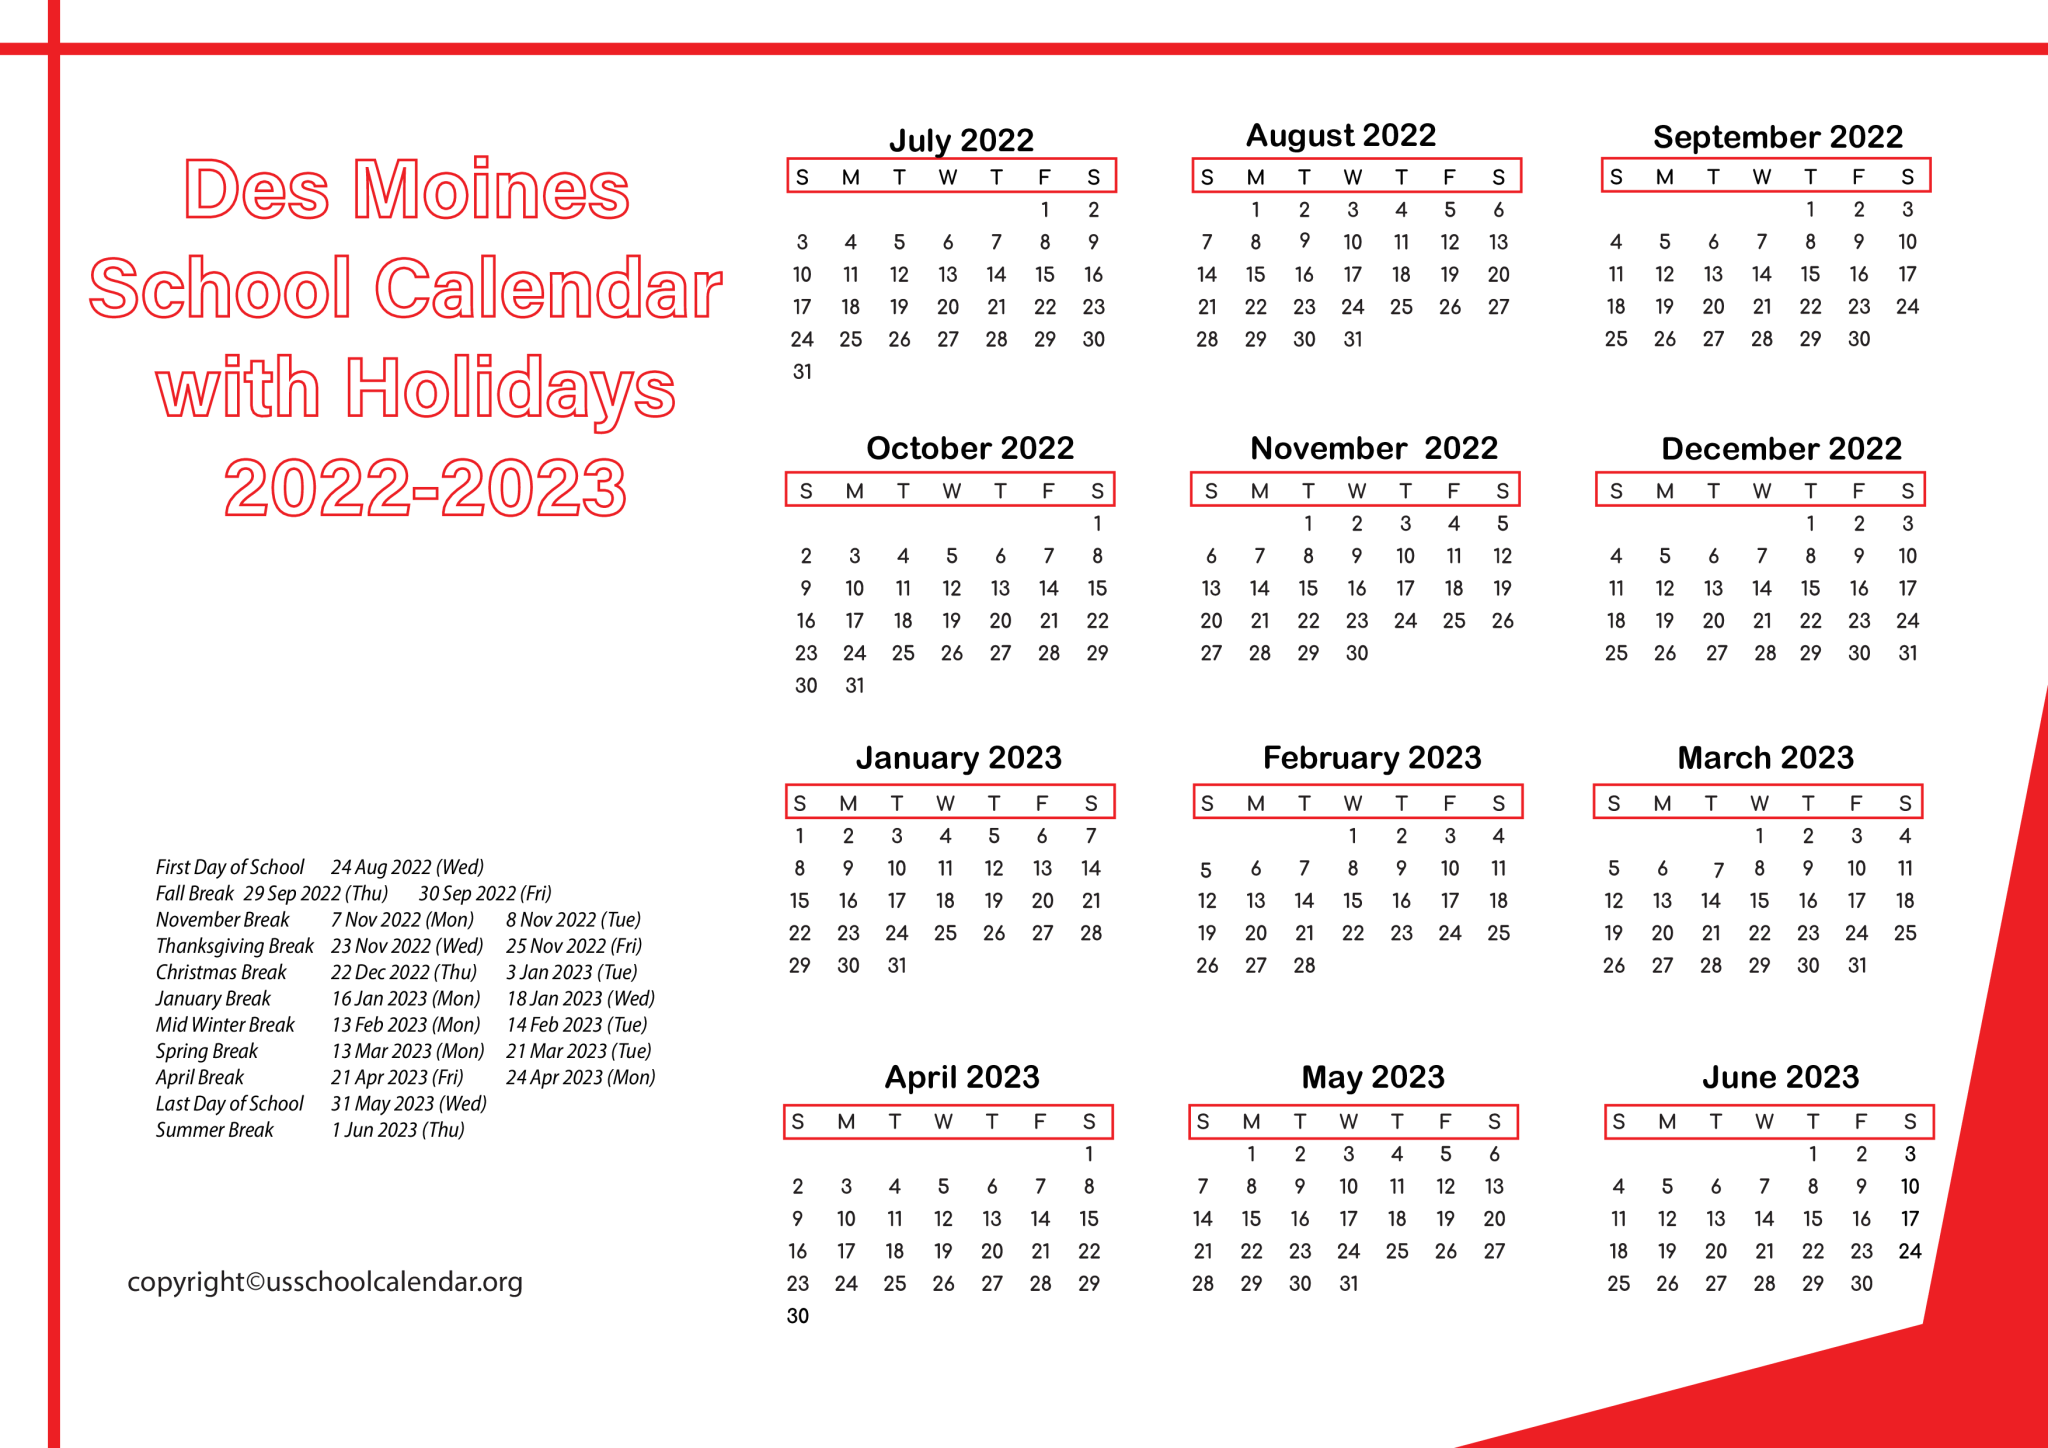 [DMS] Des Moines School Calendar with Holidays 20222023